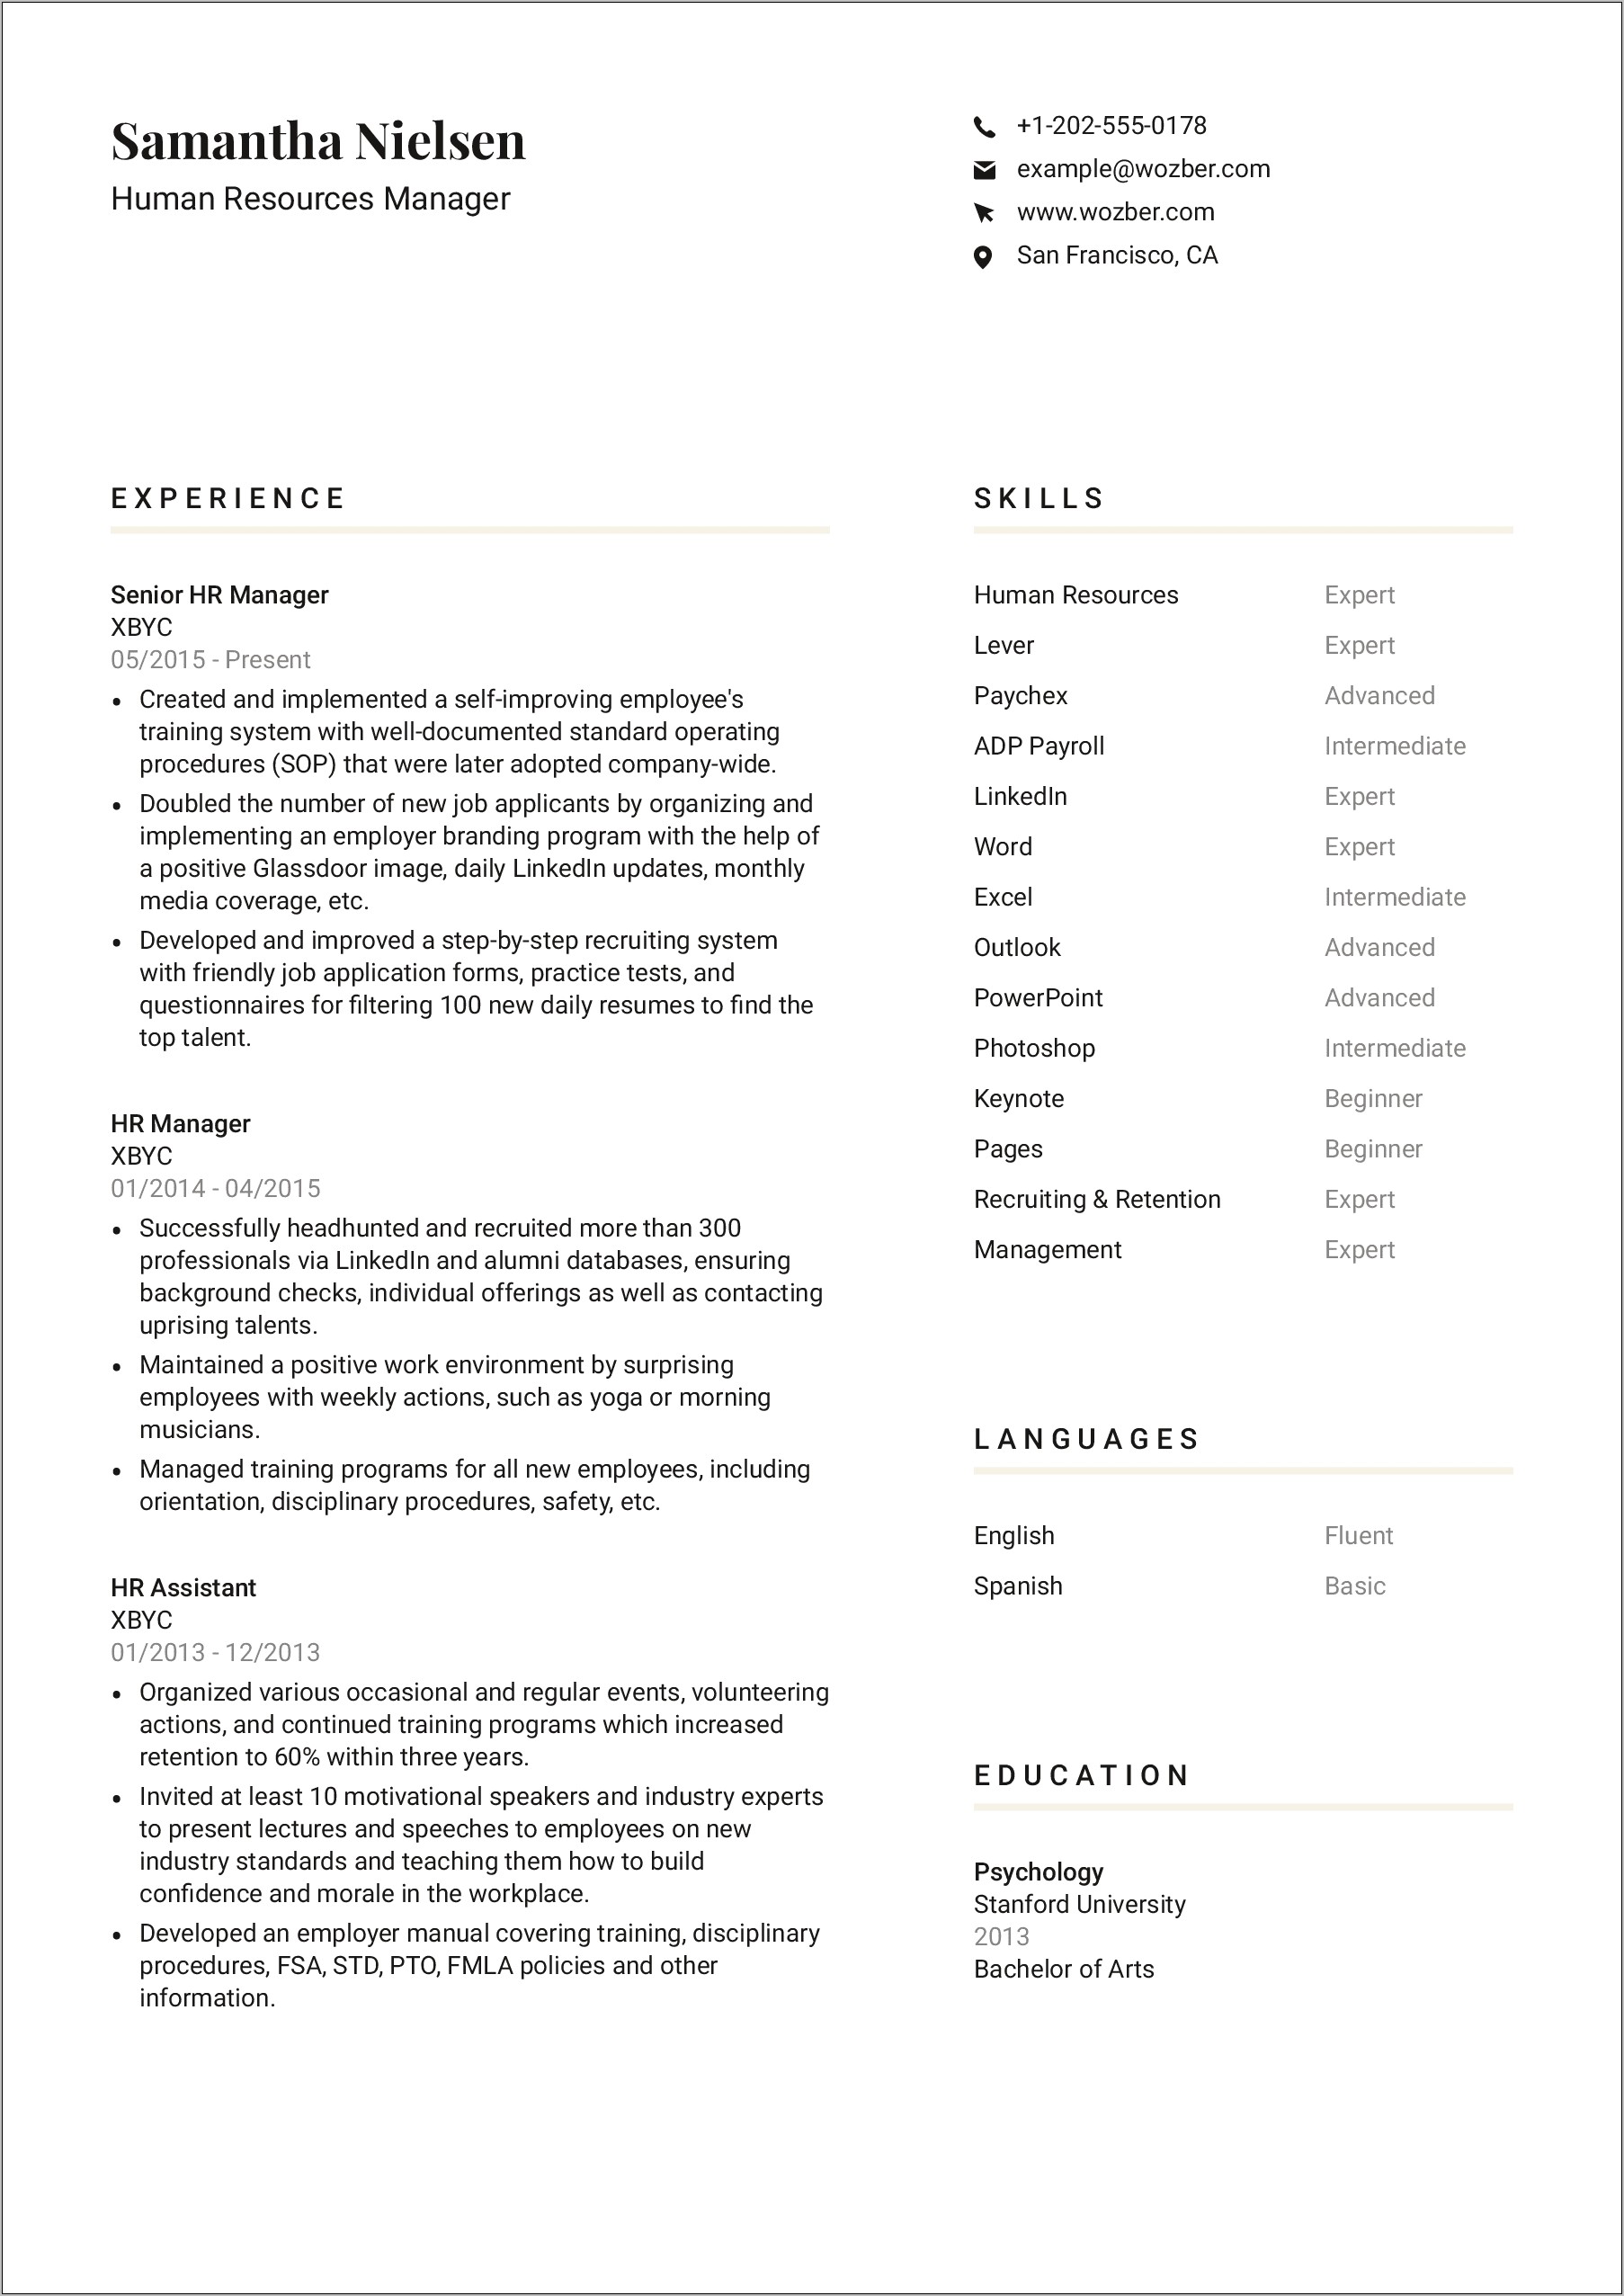 Example Image Of A Resume